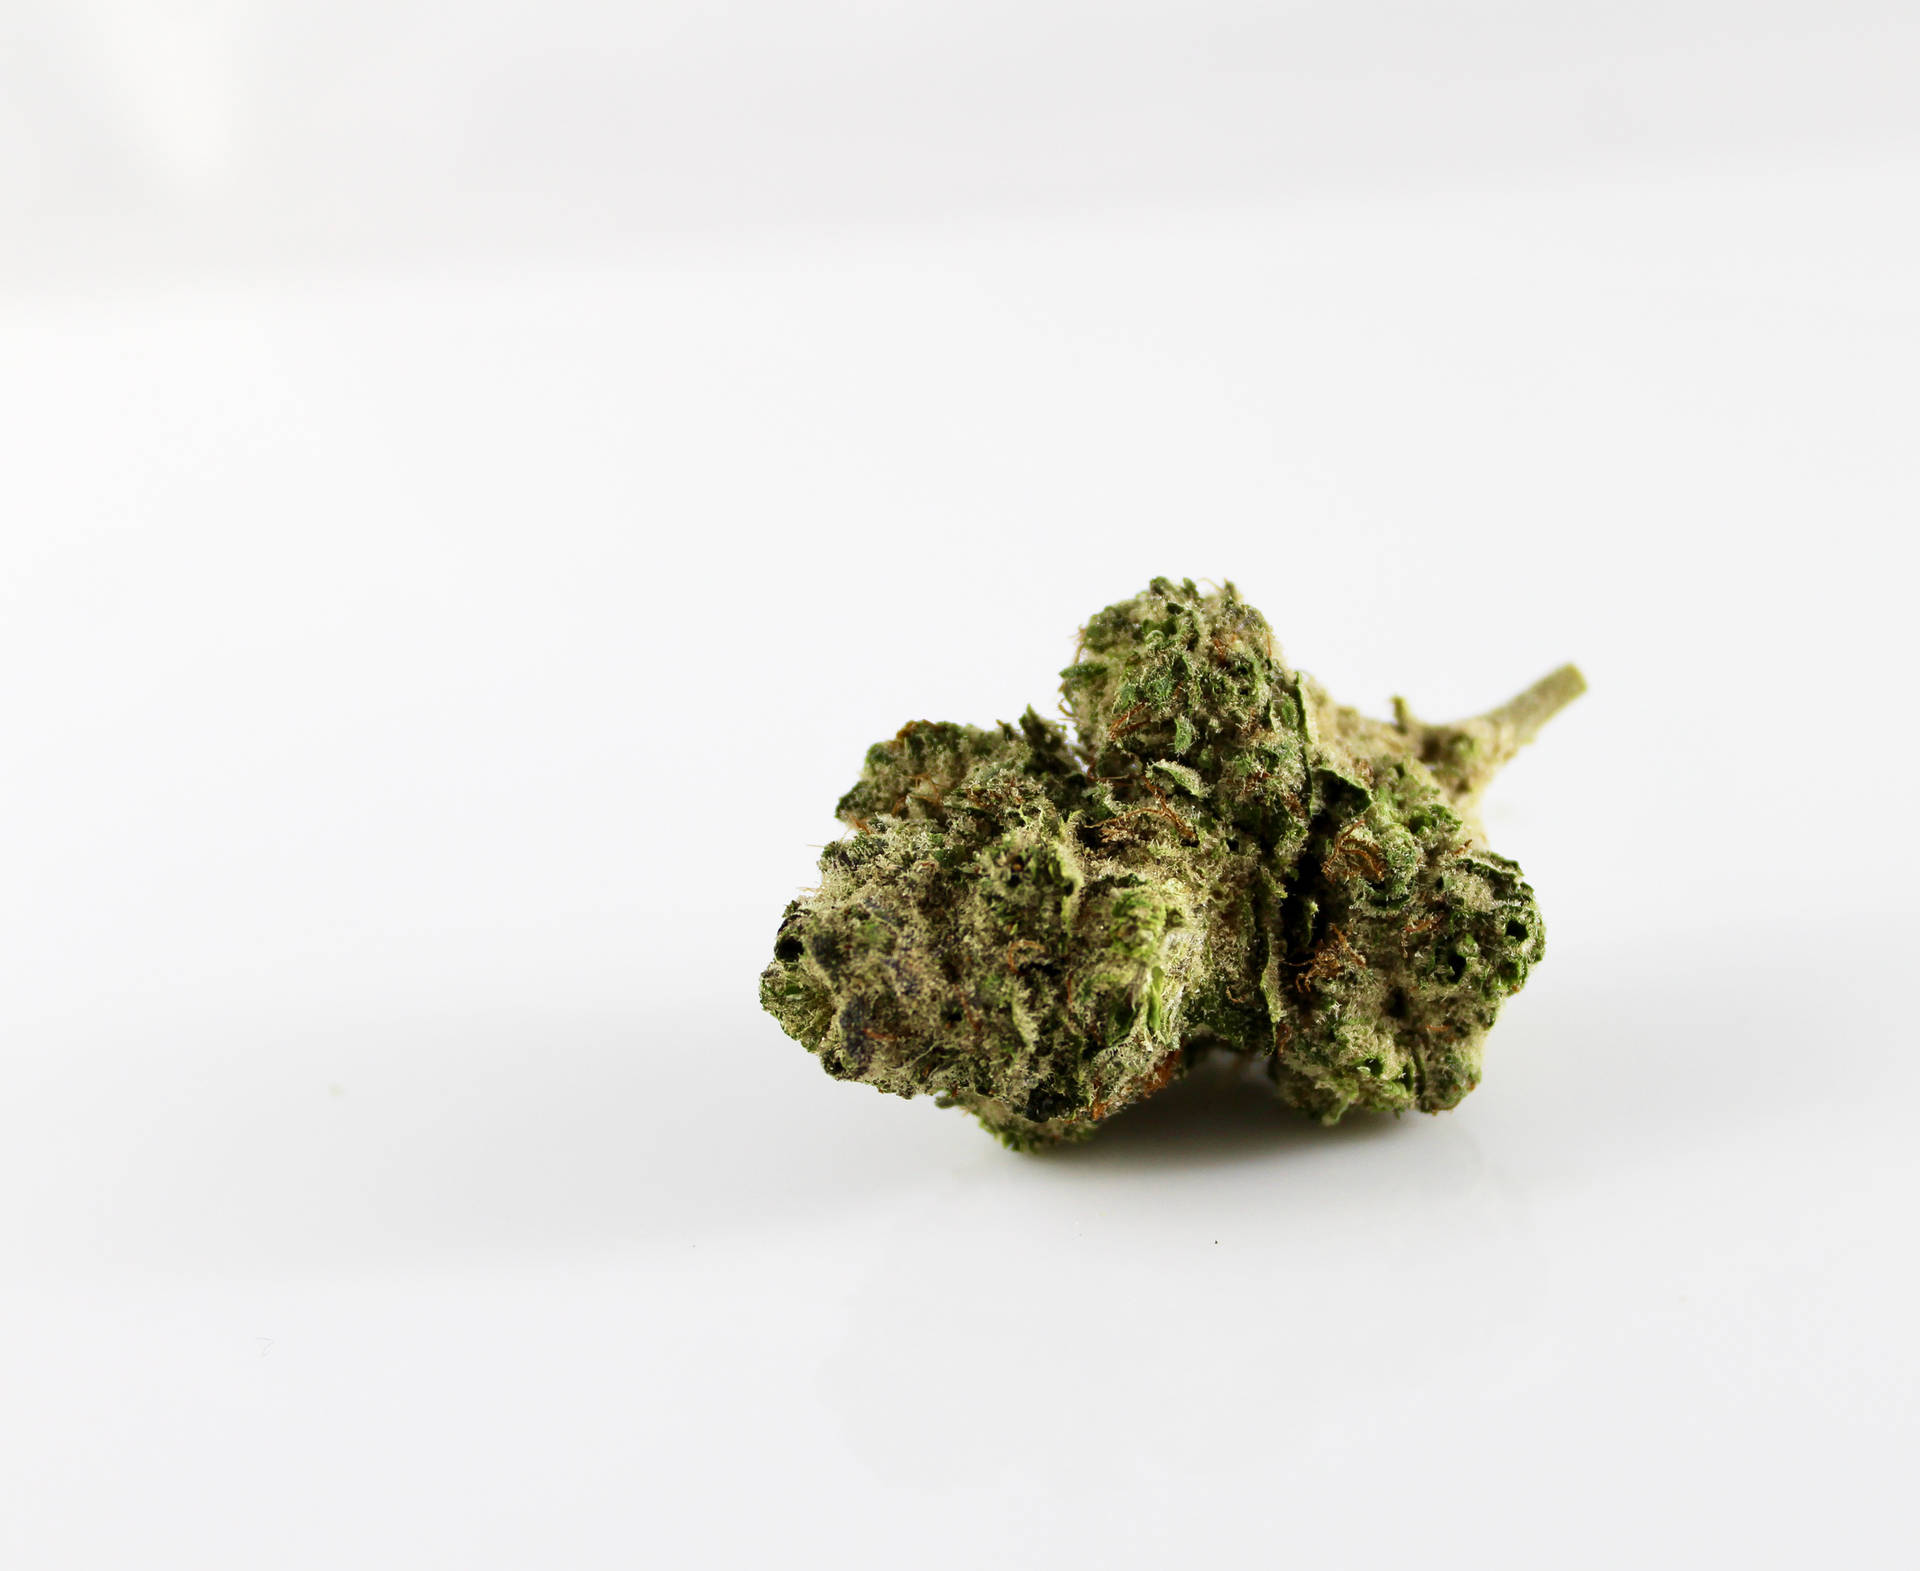 Weed 3300X2700 Wallpaper and Background Image